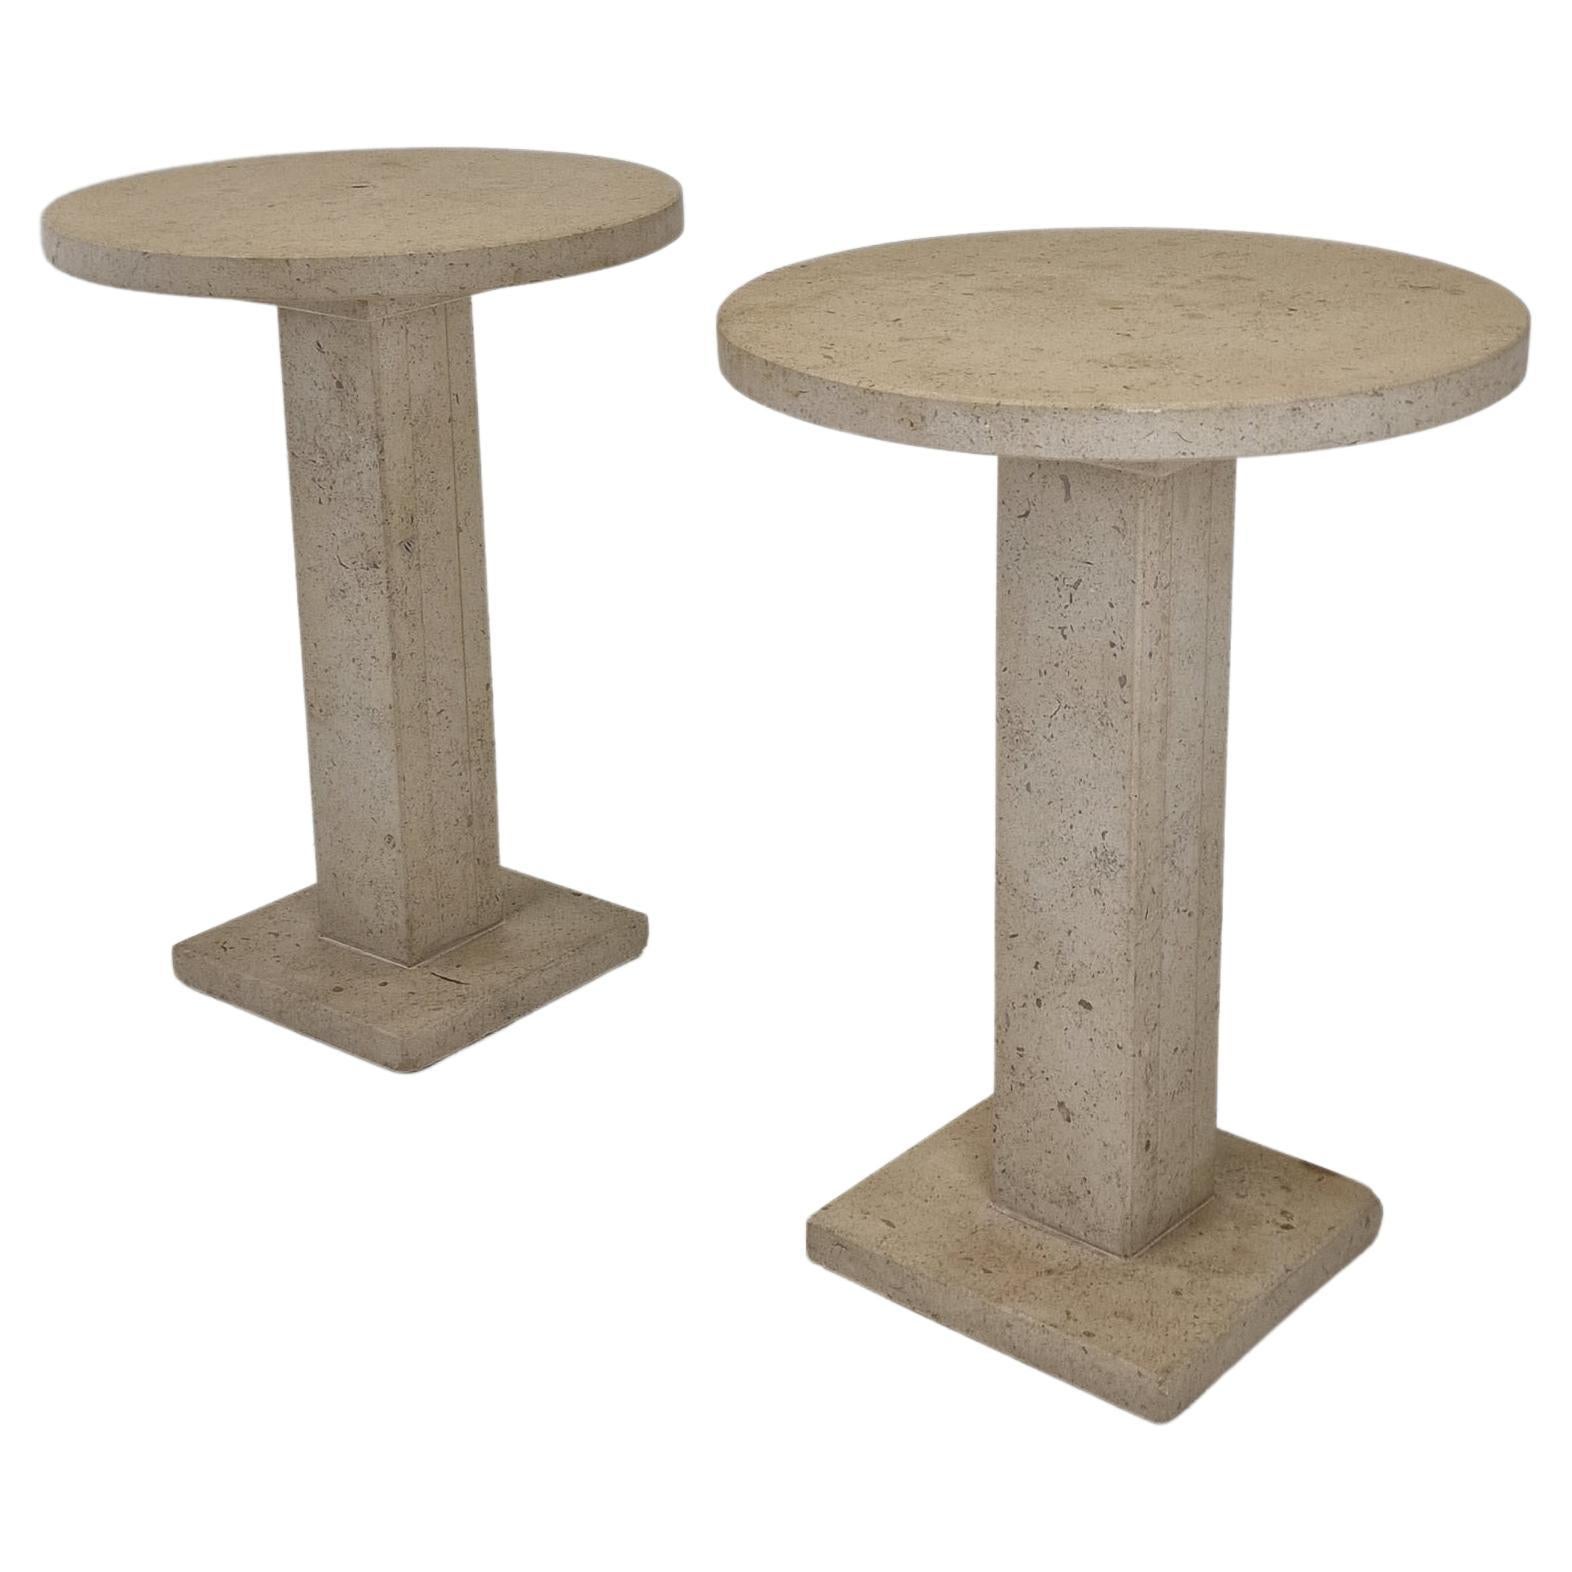 Set of 2 Italian Travertine for Stone Pedestals or Side Tables, 1980s